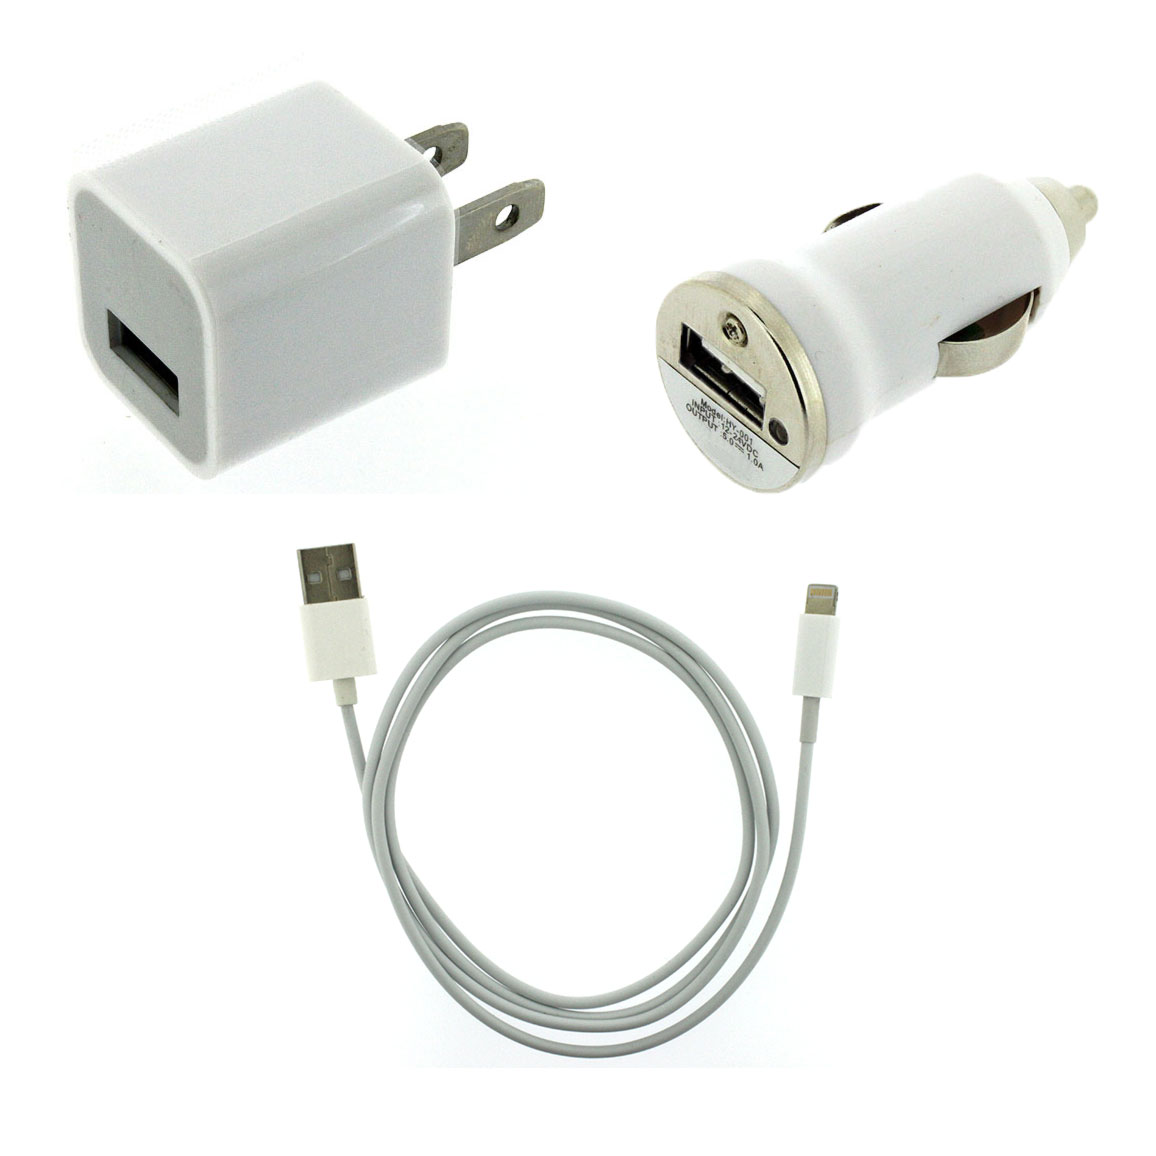 Home Wall+Car Charger+8 Pin to USB Cable for iPhone 5 iPod Touch 5 Nano ...